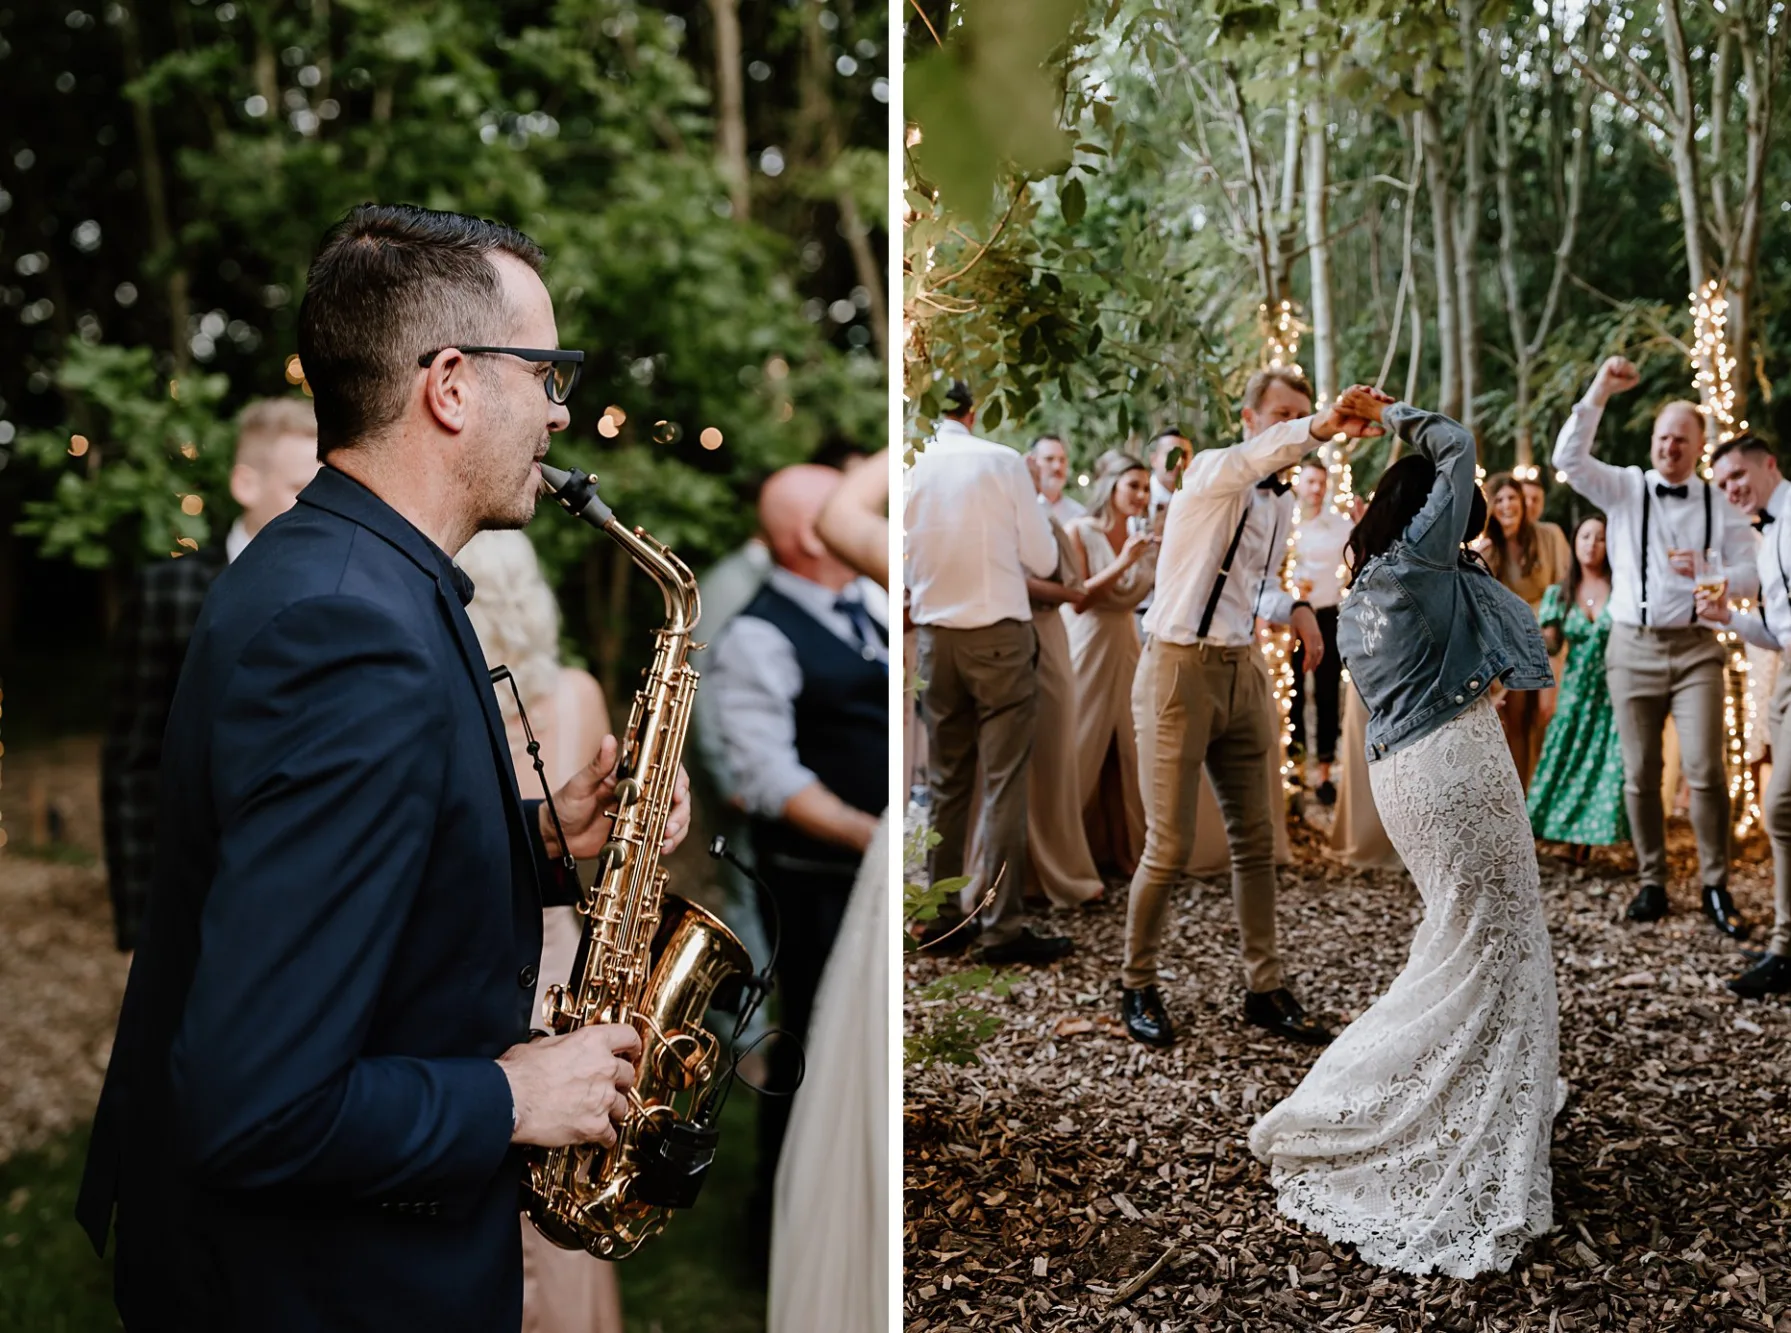 The first photo shows a man playing a saxophone at a wedding. The second photo shows a groom spinning his bride around in the woodland dancefloor at Oaklands.